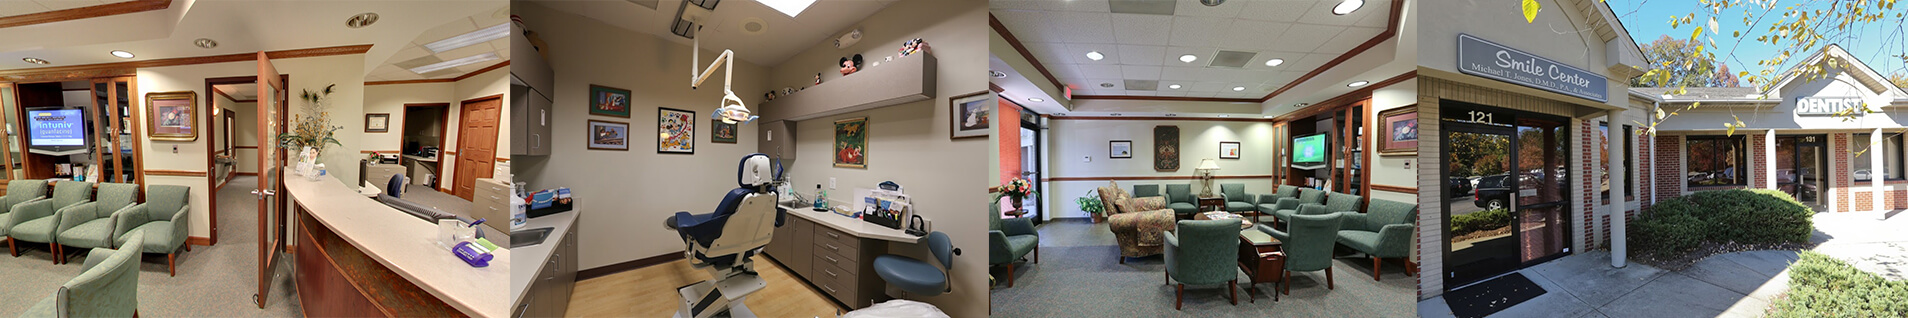 Smile Center Office Collage Photo